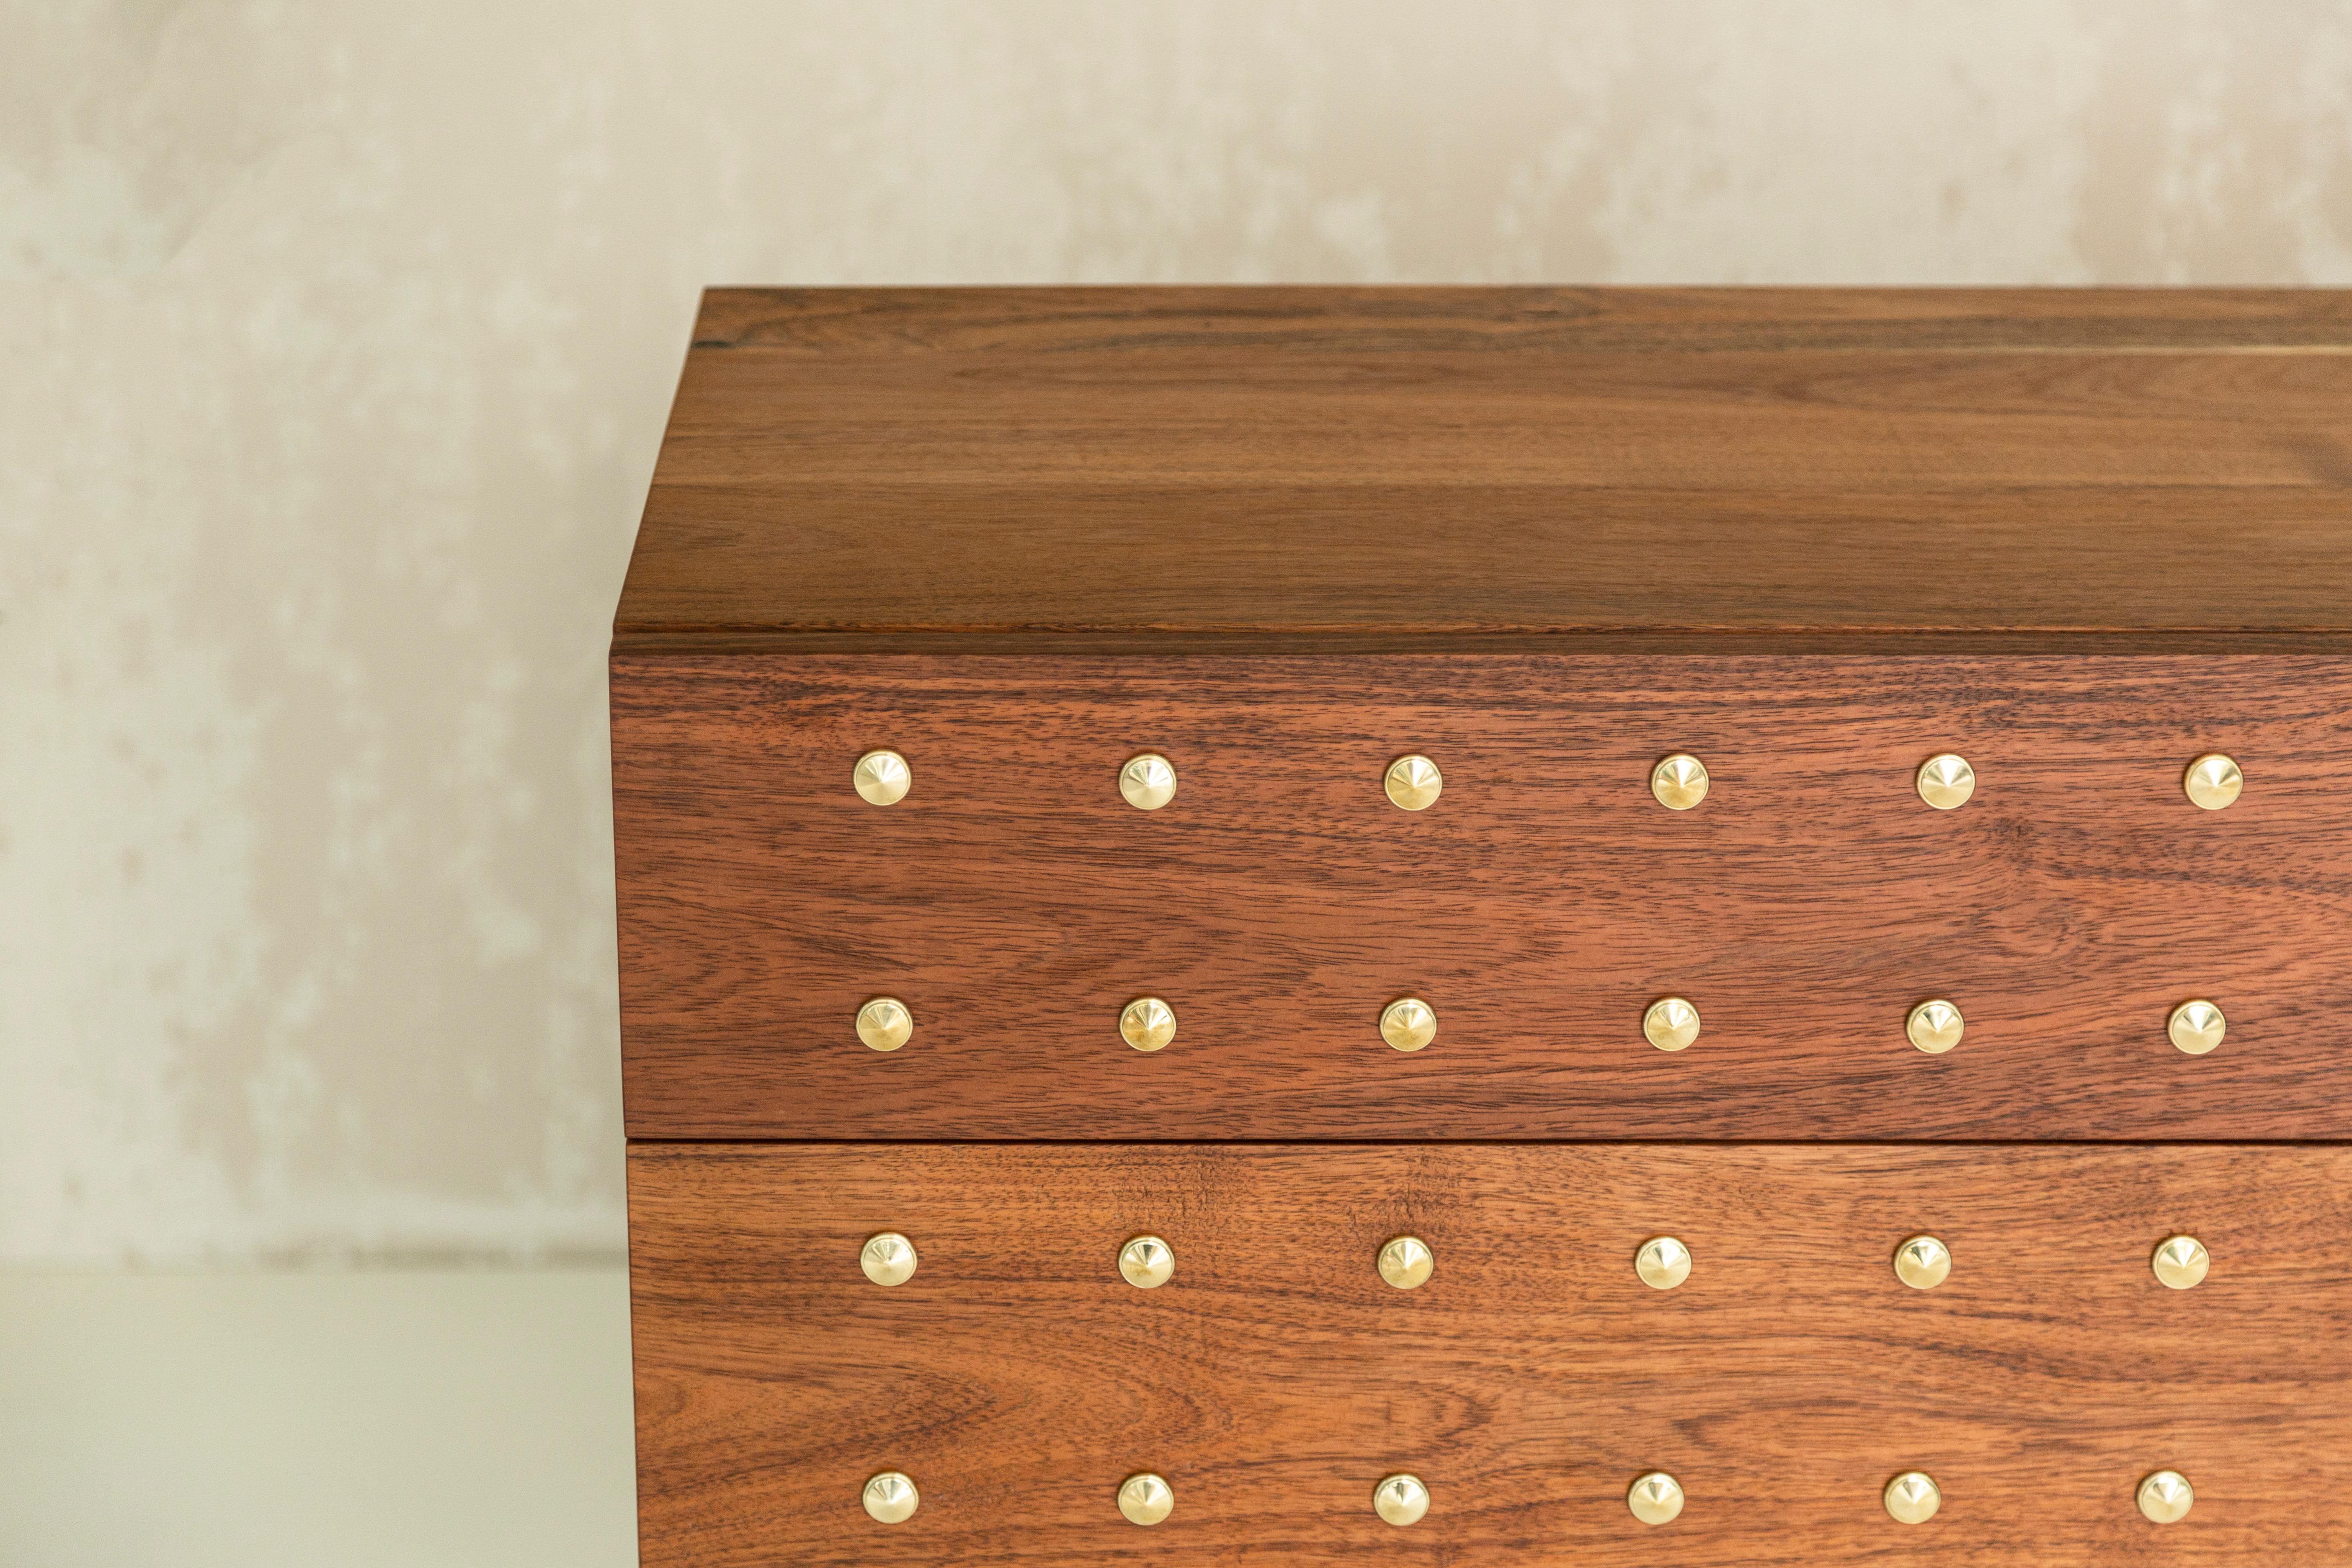 Mid-Century Modern Annette Storage Cabinet Hand Made in Tzalam Wood and Brass Buttons by Tana Karei For Sale